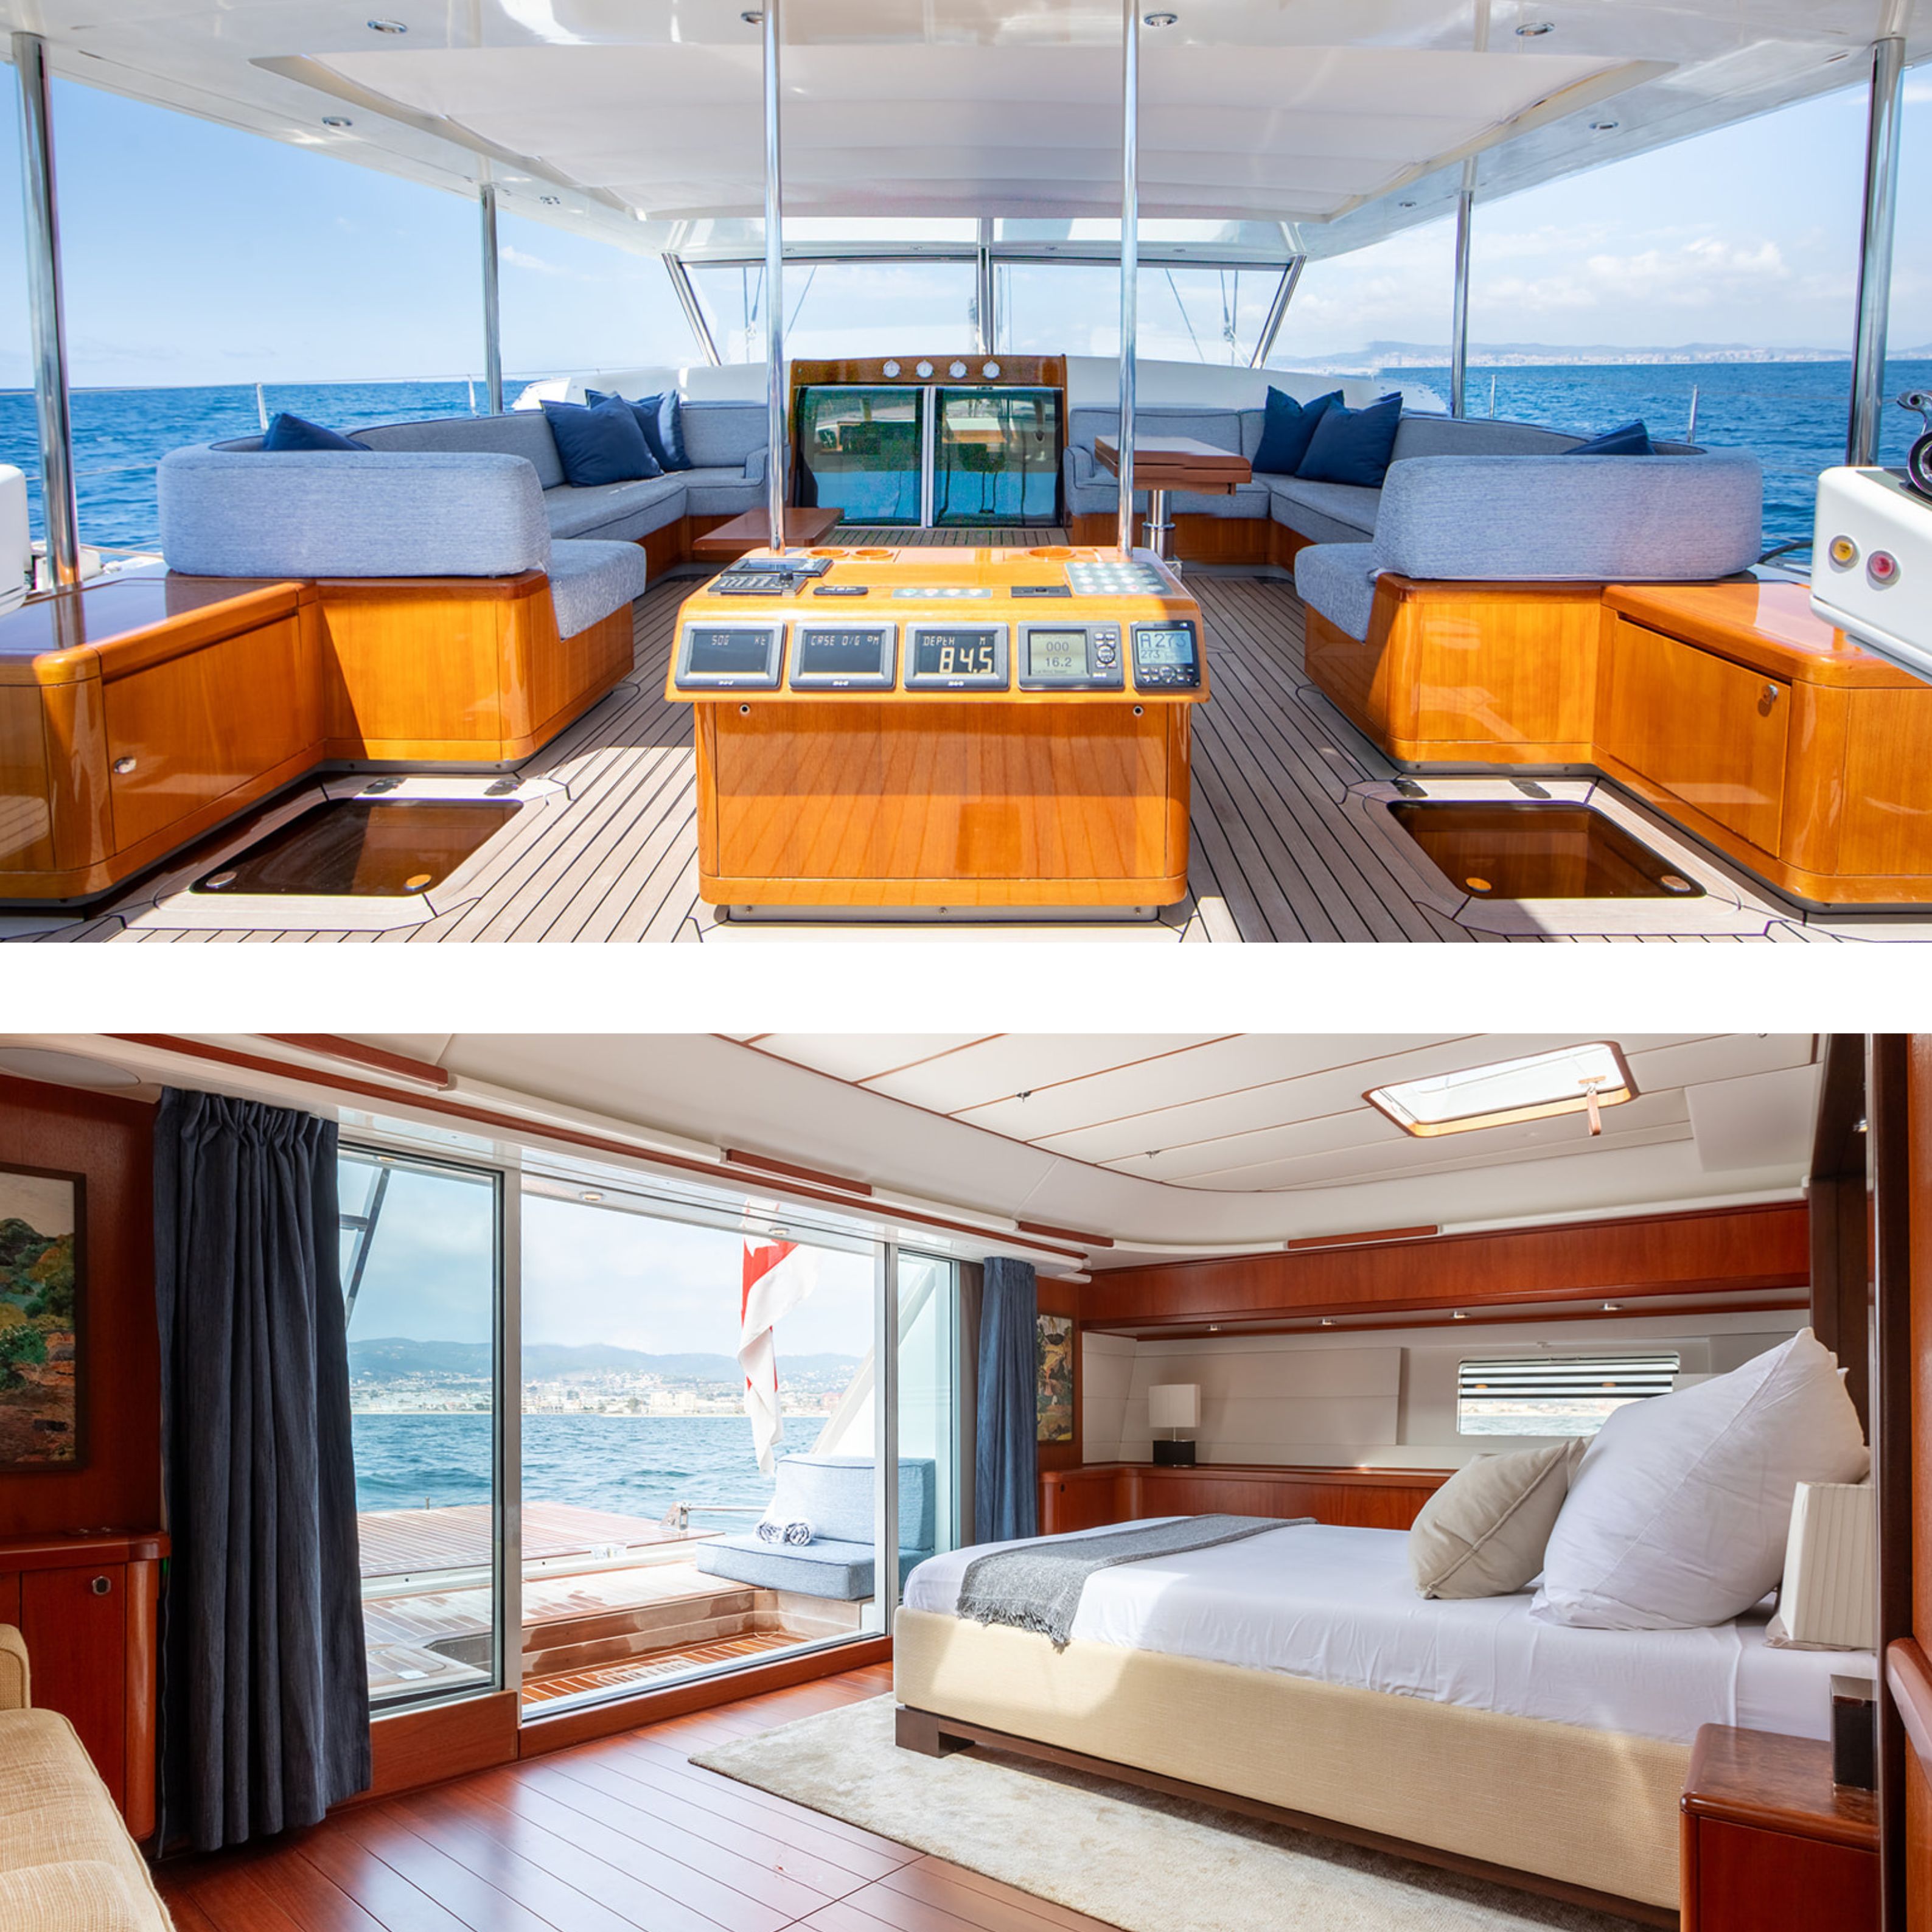 The Swan 105 Sailing Yacht "SELENA" Now Available for Charter